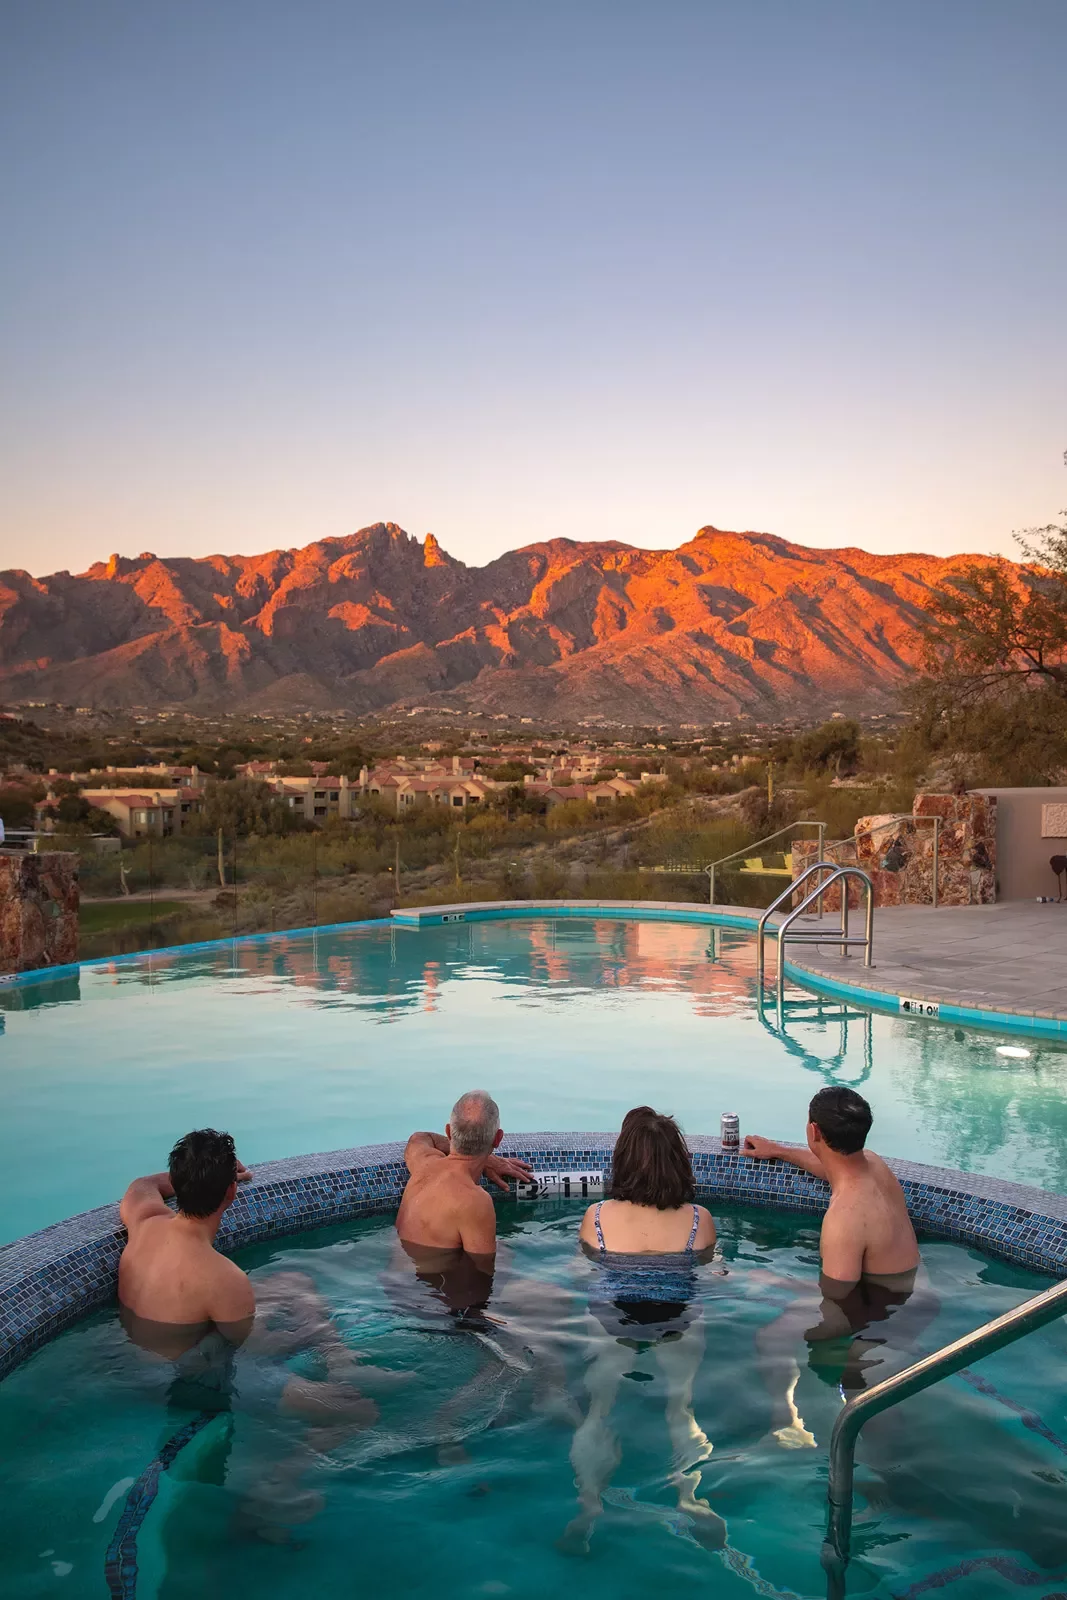 Guests in hot tub at sunset facing mountains AZ